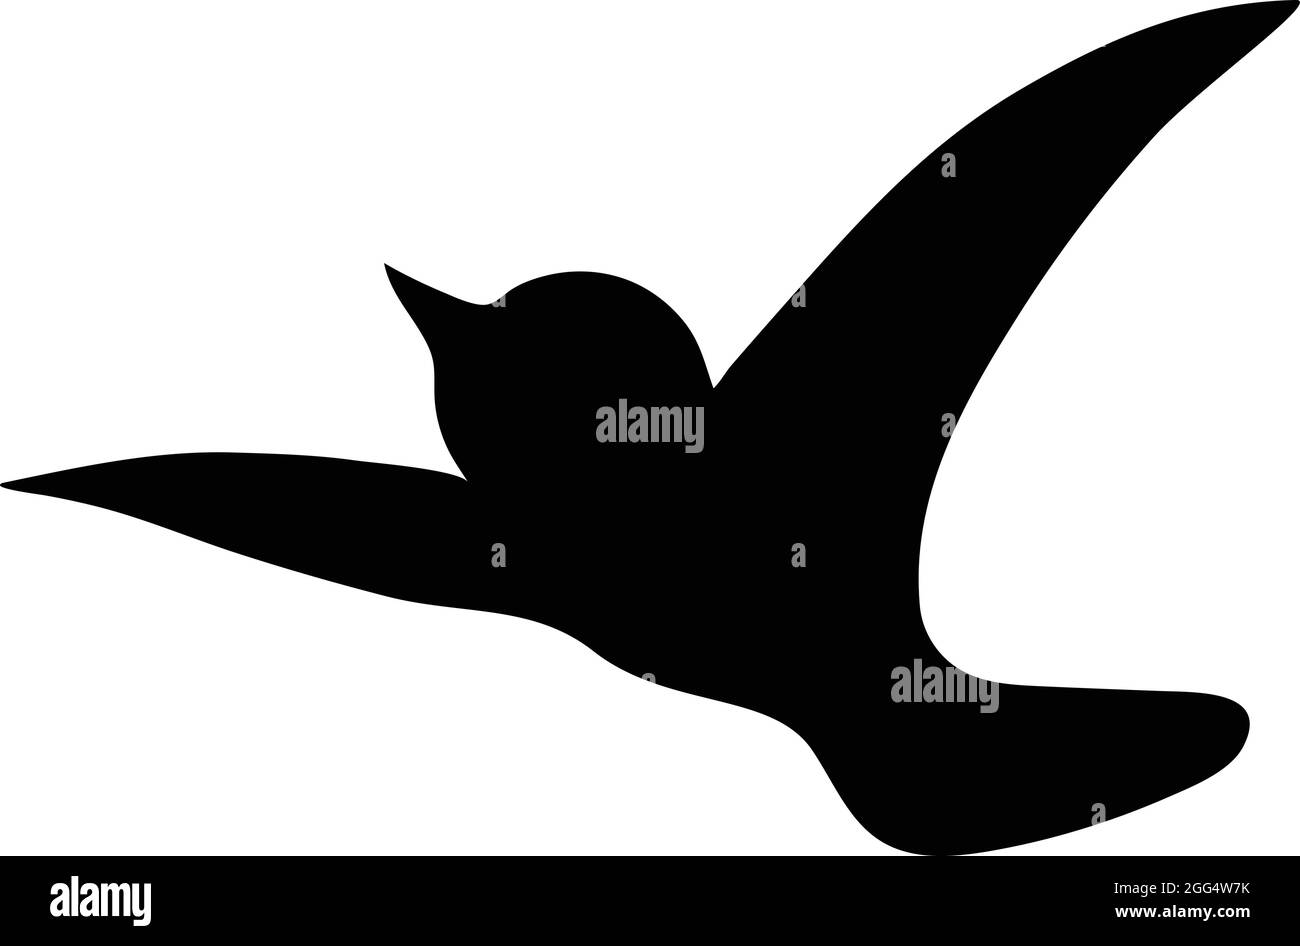 Black Bird Silhouette Against White Background No Sky. Free Vector Stock Vector